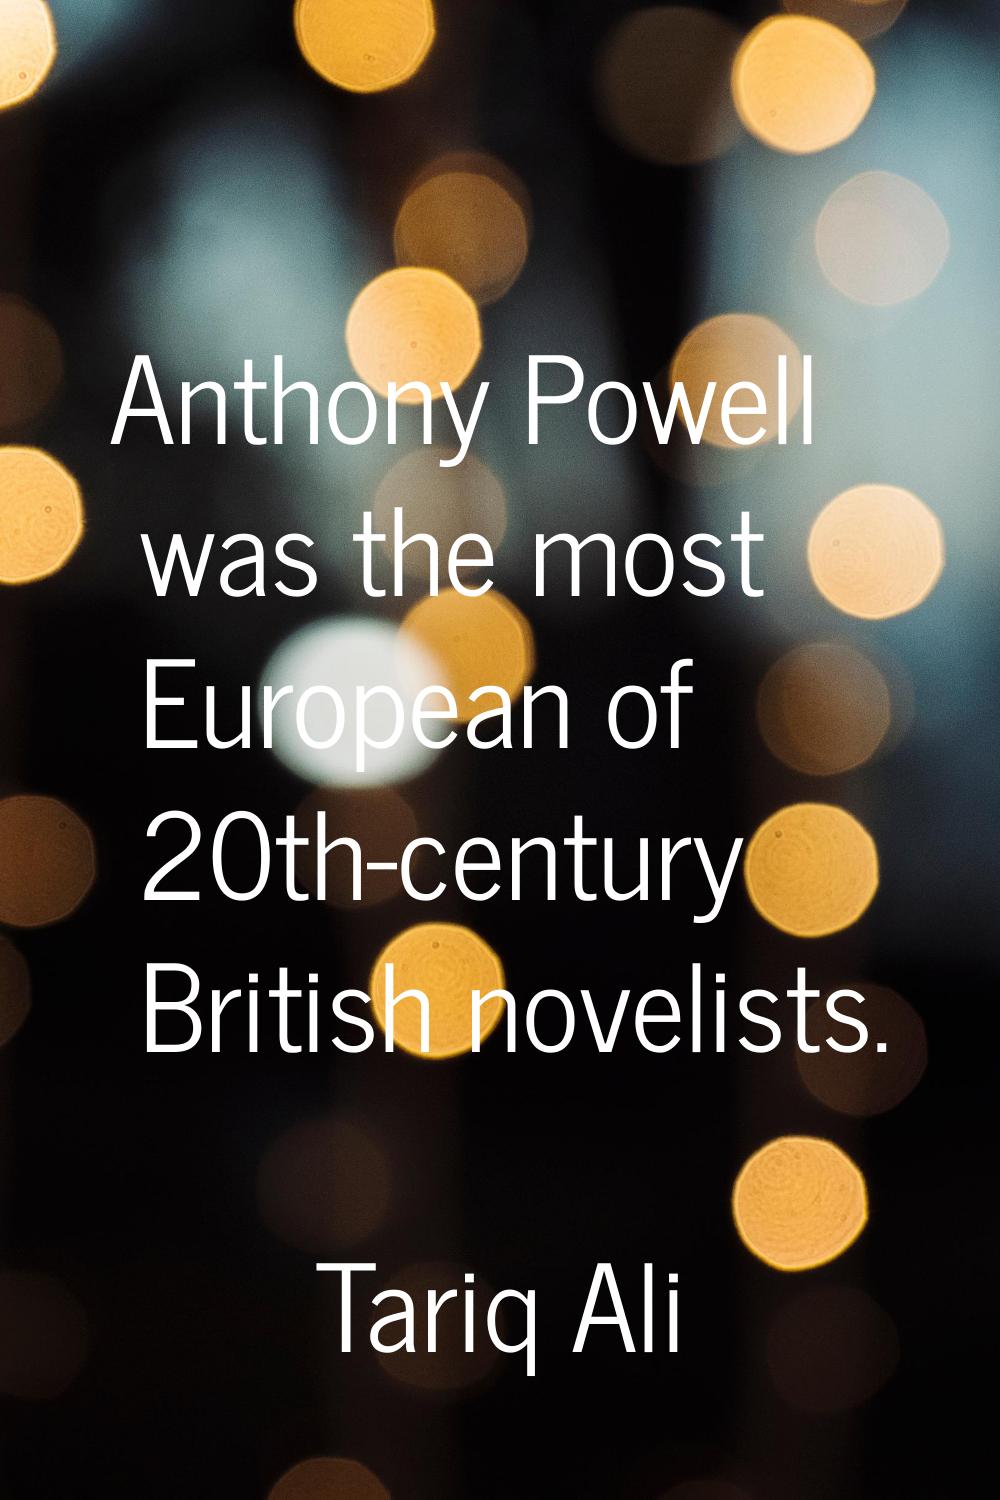 Anthony Powell was the most European of 20th-century British novelists.